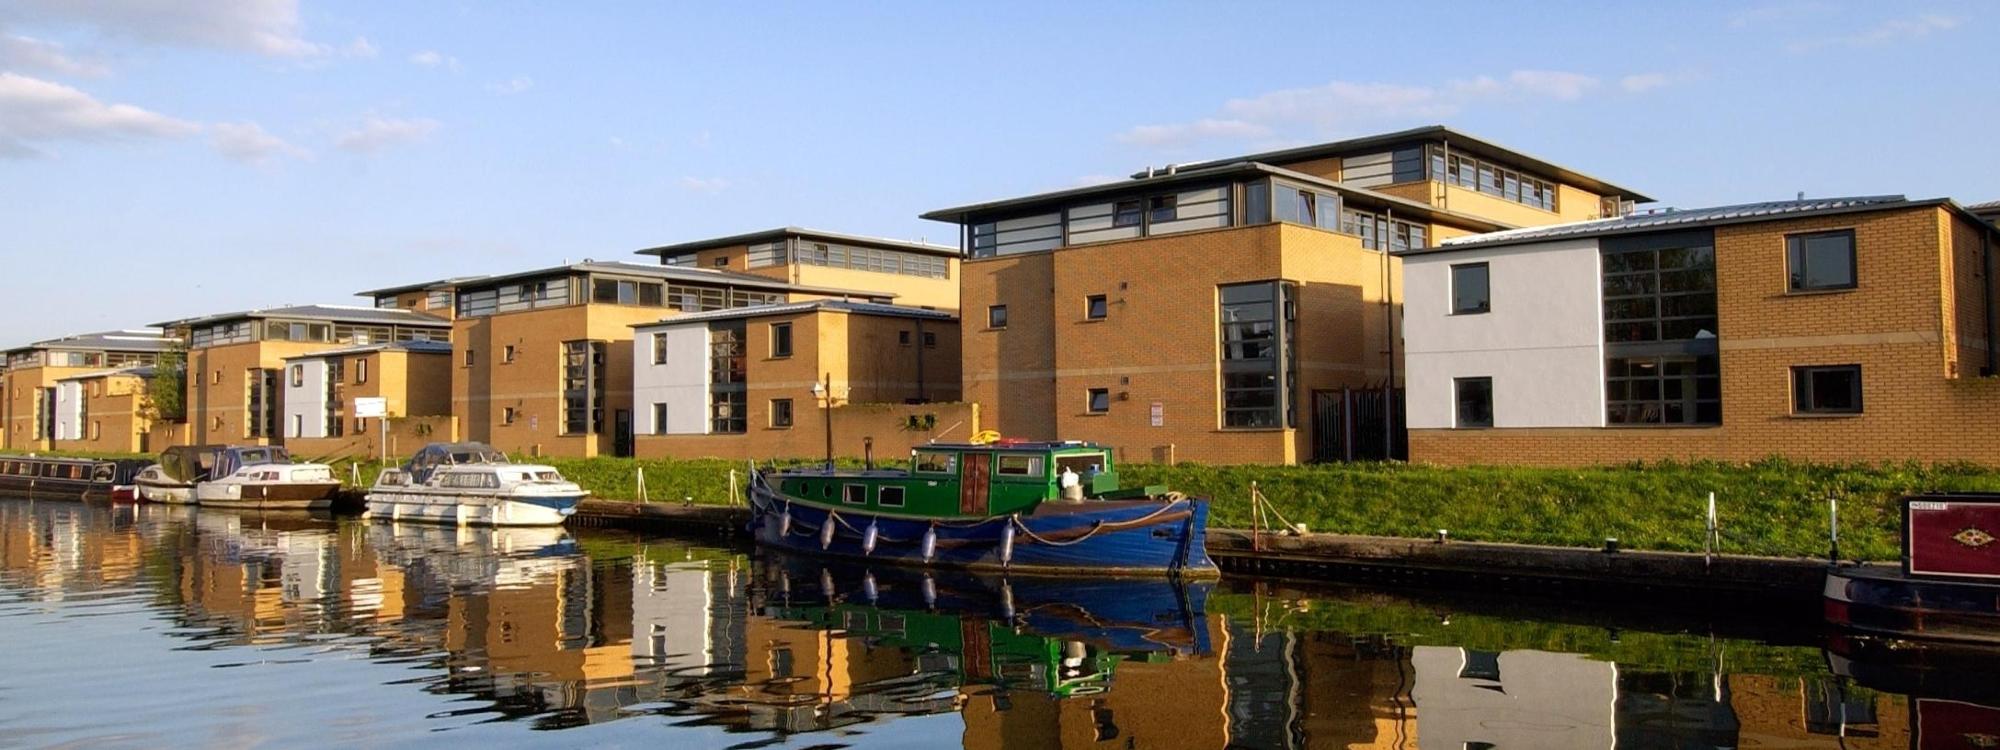 Lincoln Courts accommodation at the University of Lincoln